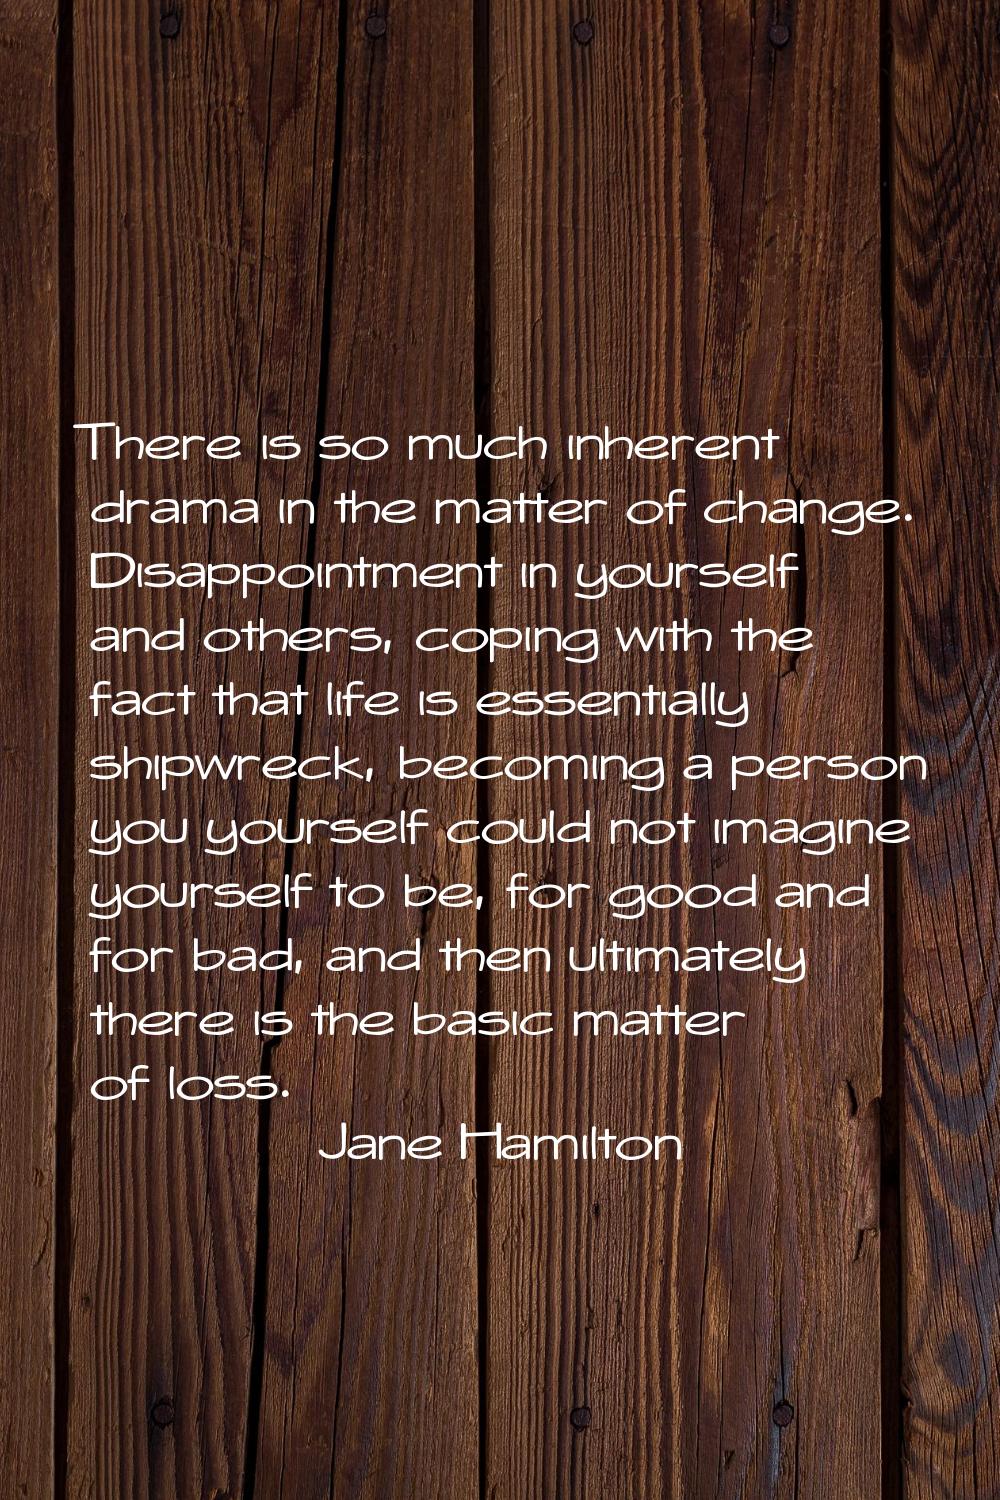 There is so much inherent drama in the matter of change. Disappointment in yourself and others, cop